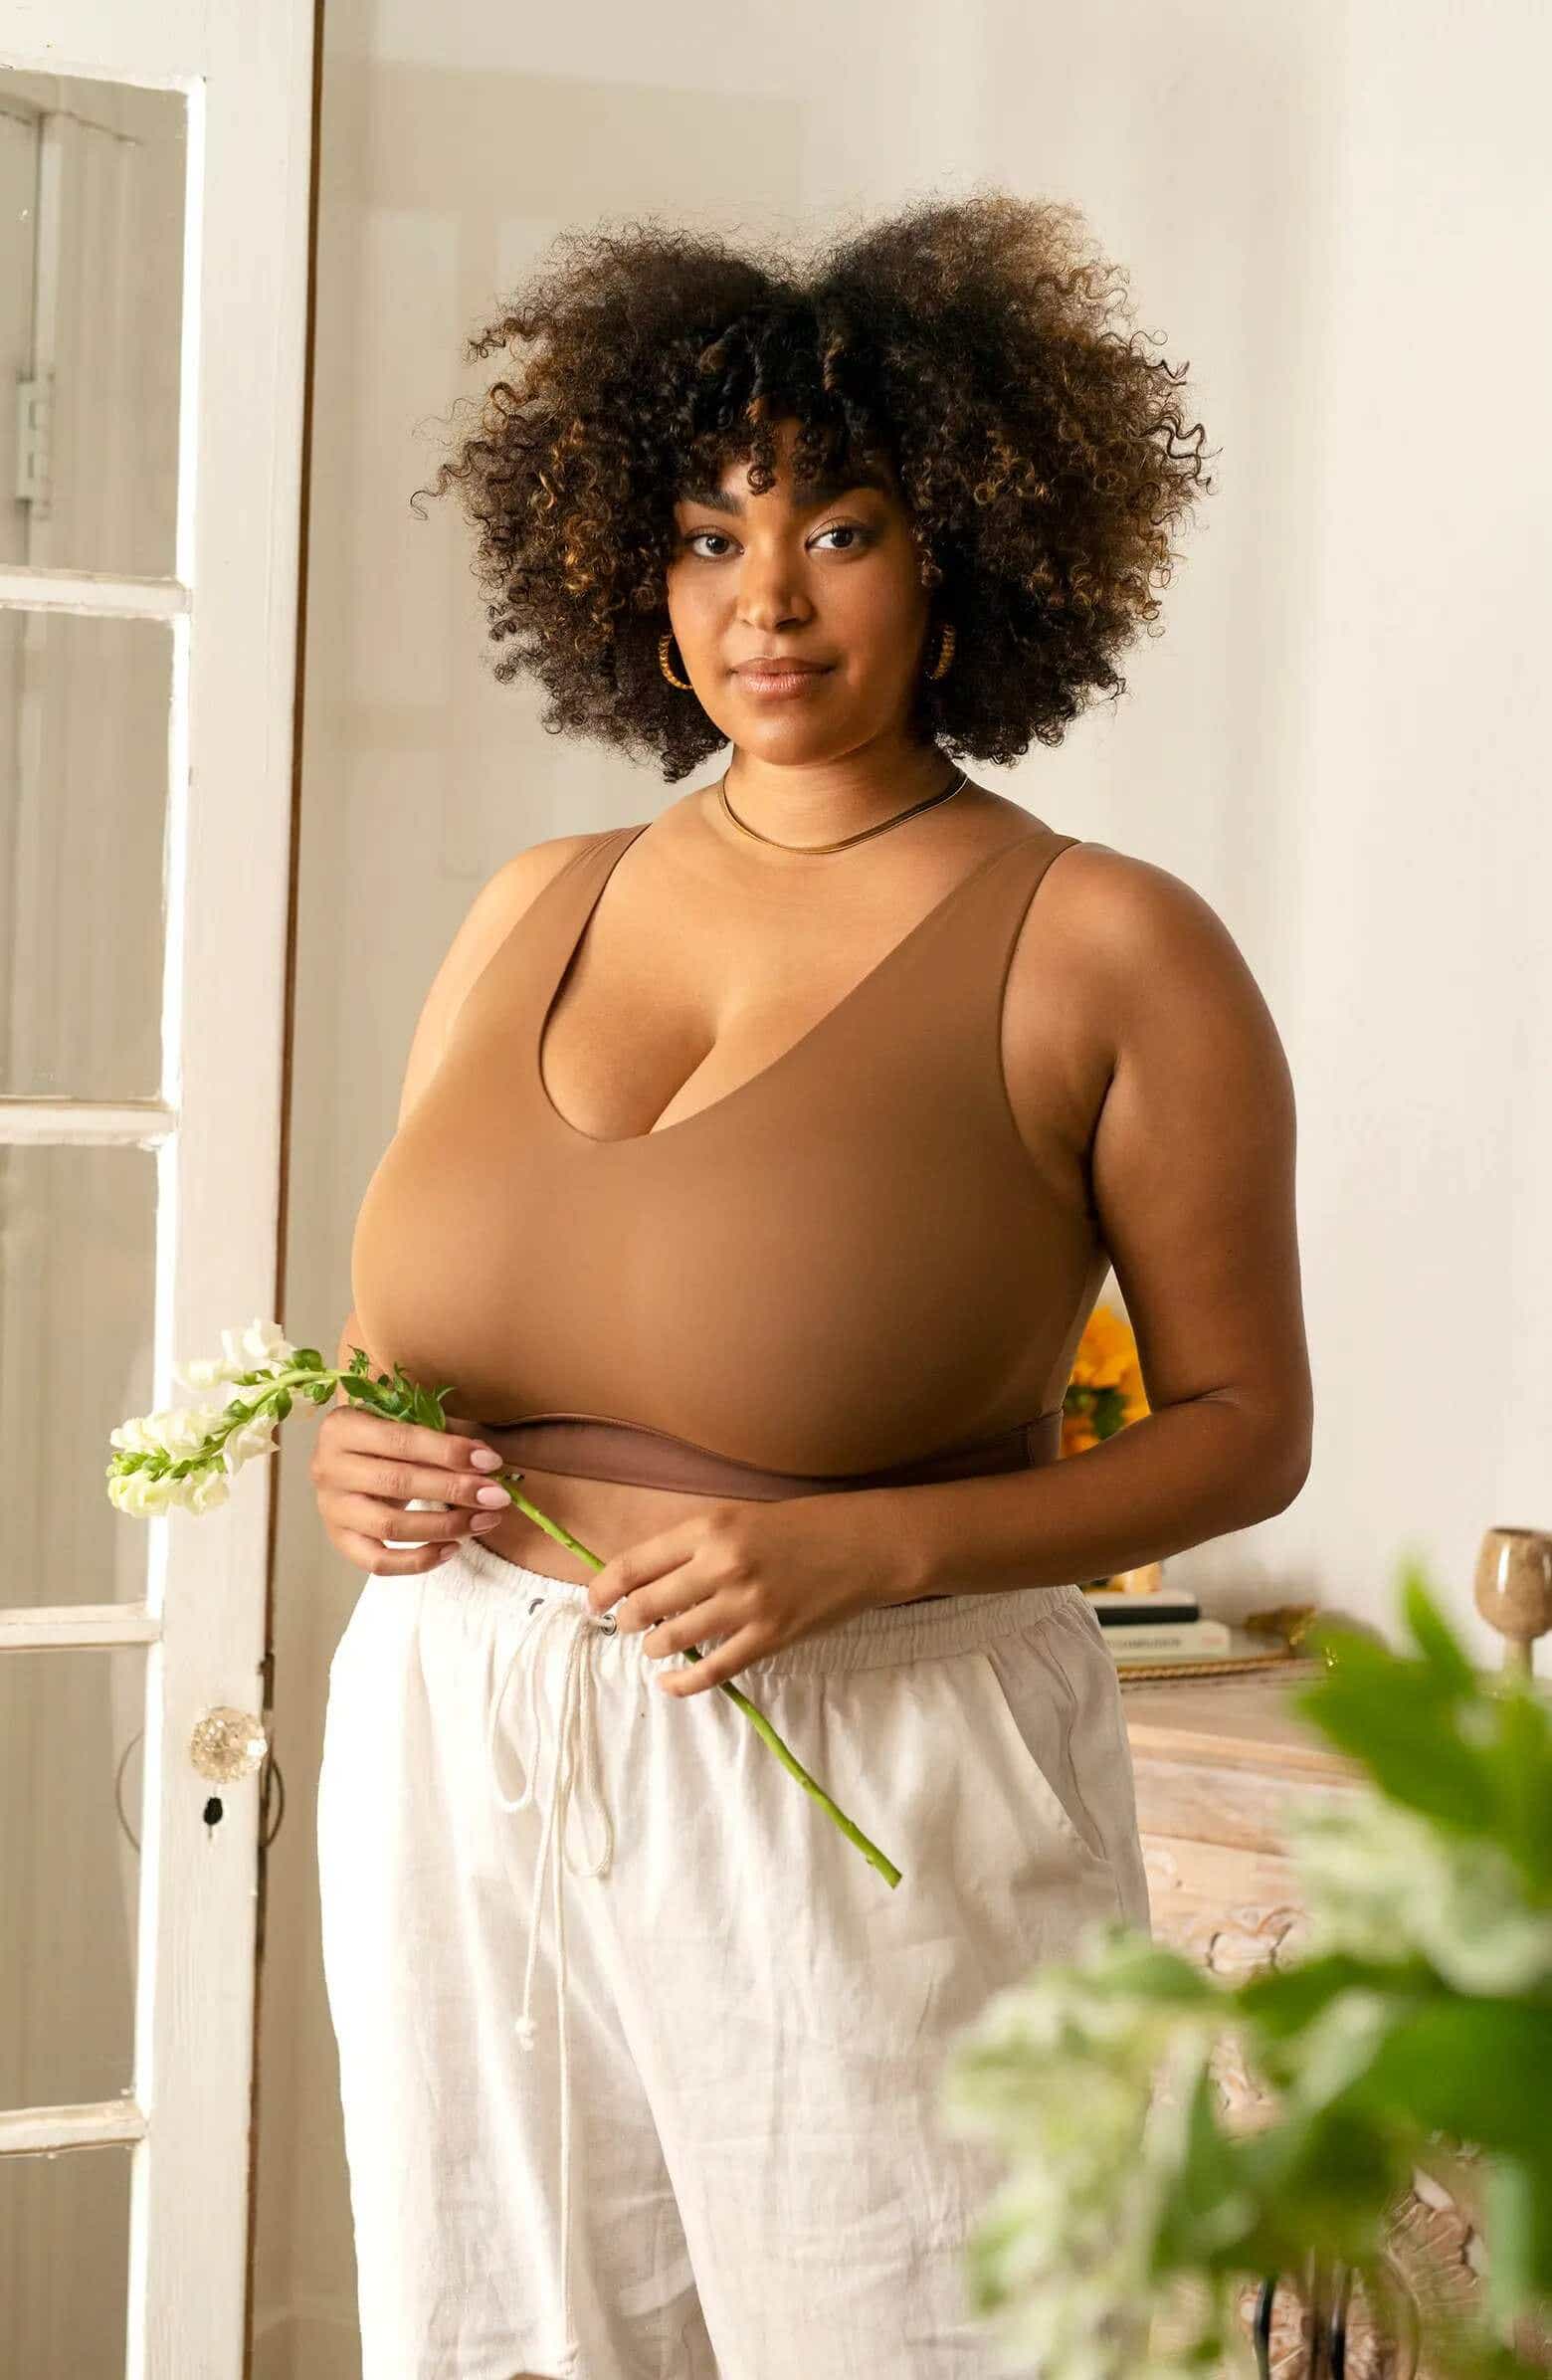 charles vanderford recommends Mature Big Breasts